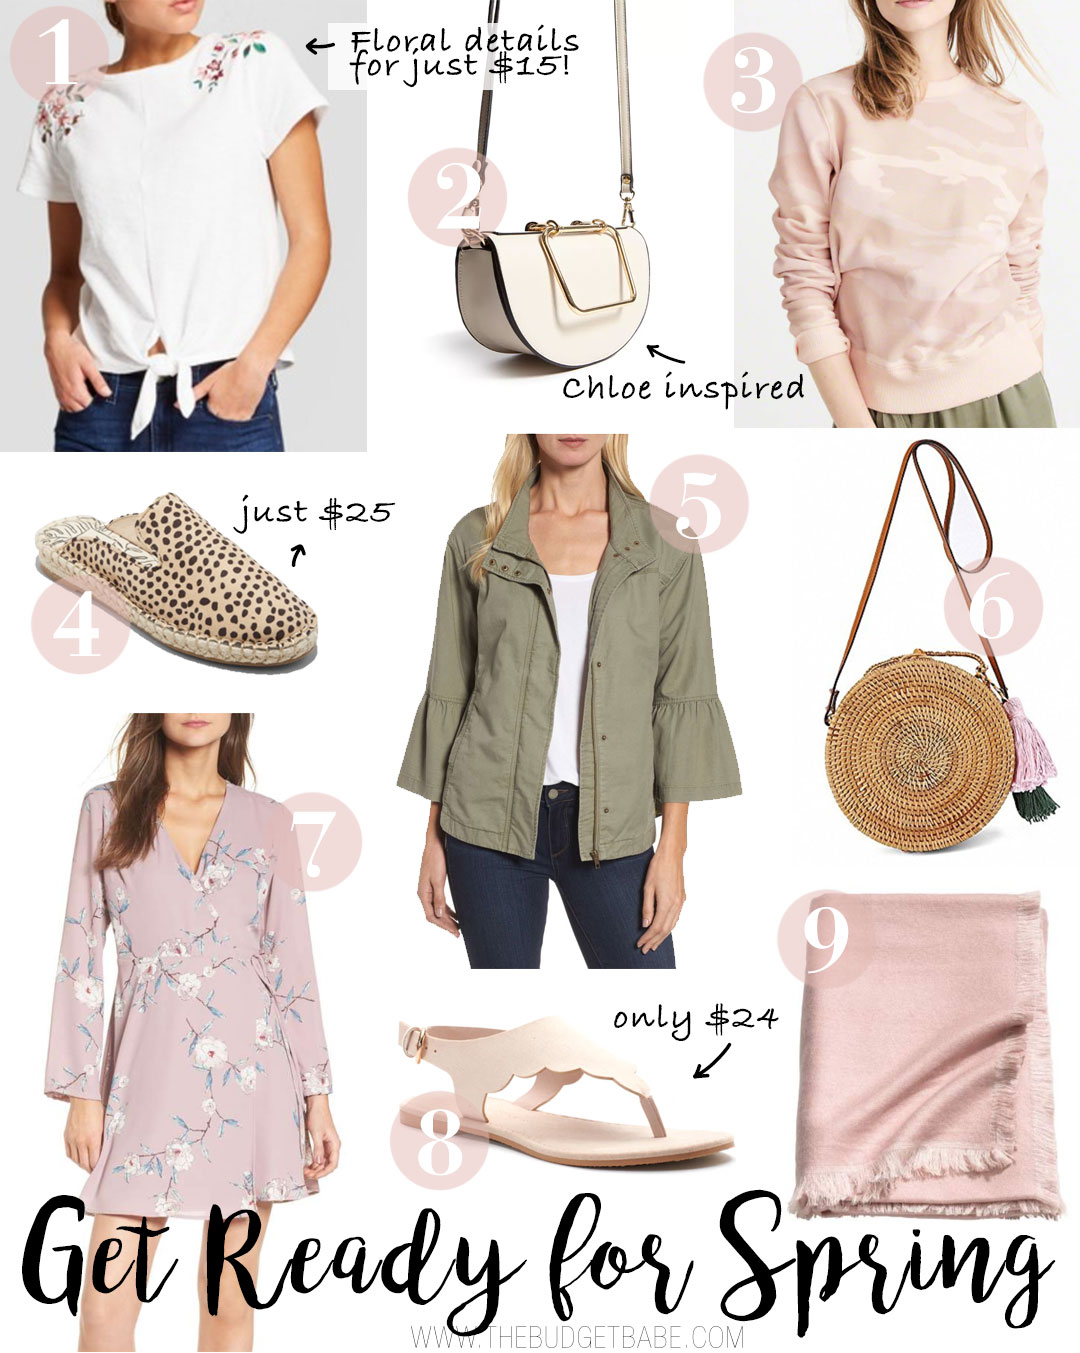 Spring sandals from $24 and more amazing budget fashion finds!